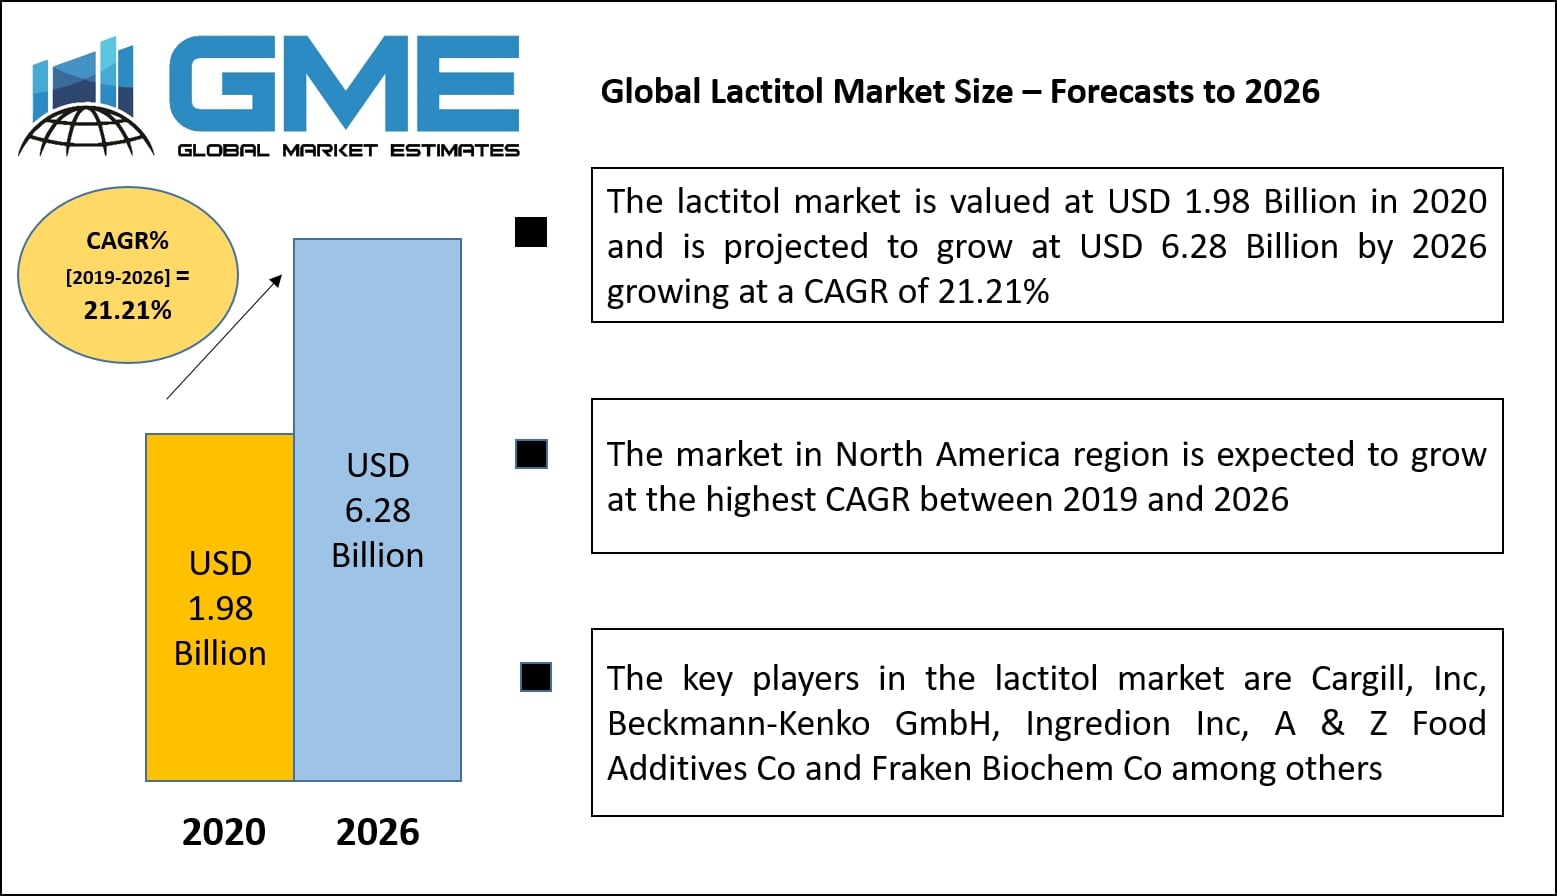 Global Lactitol Market Size – Forecasts to 2026